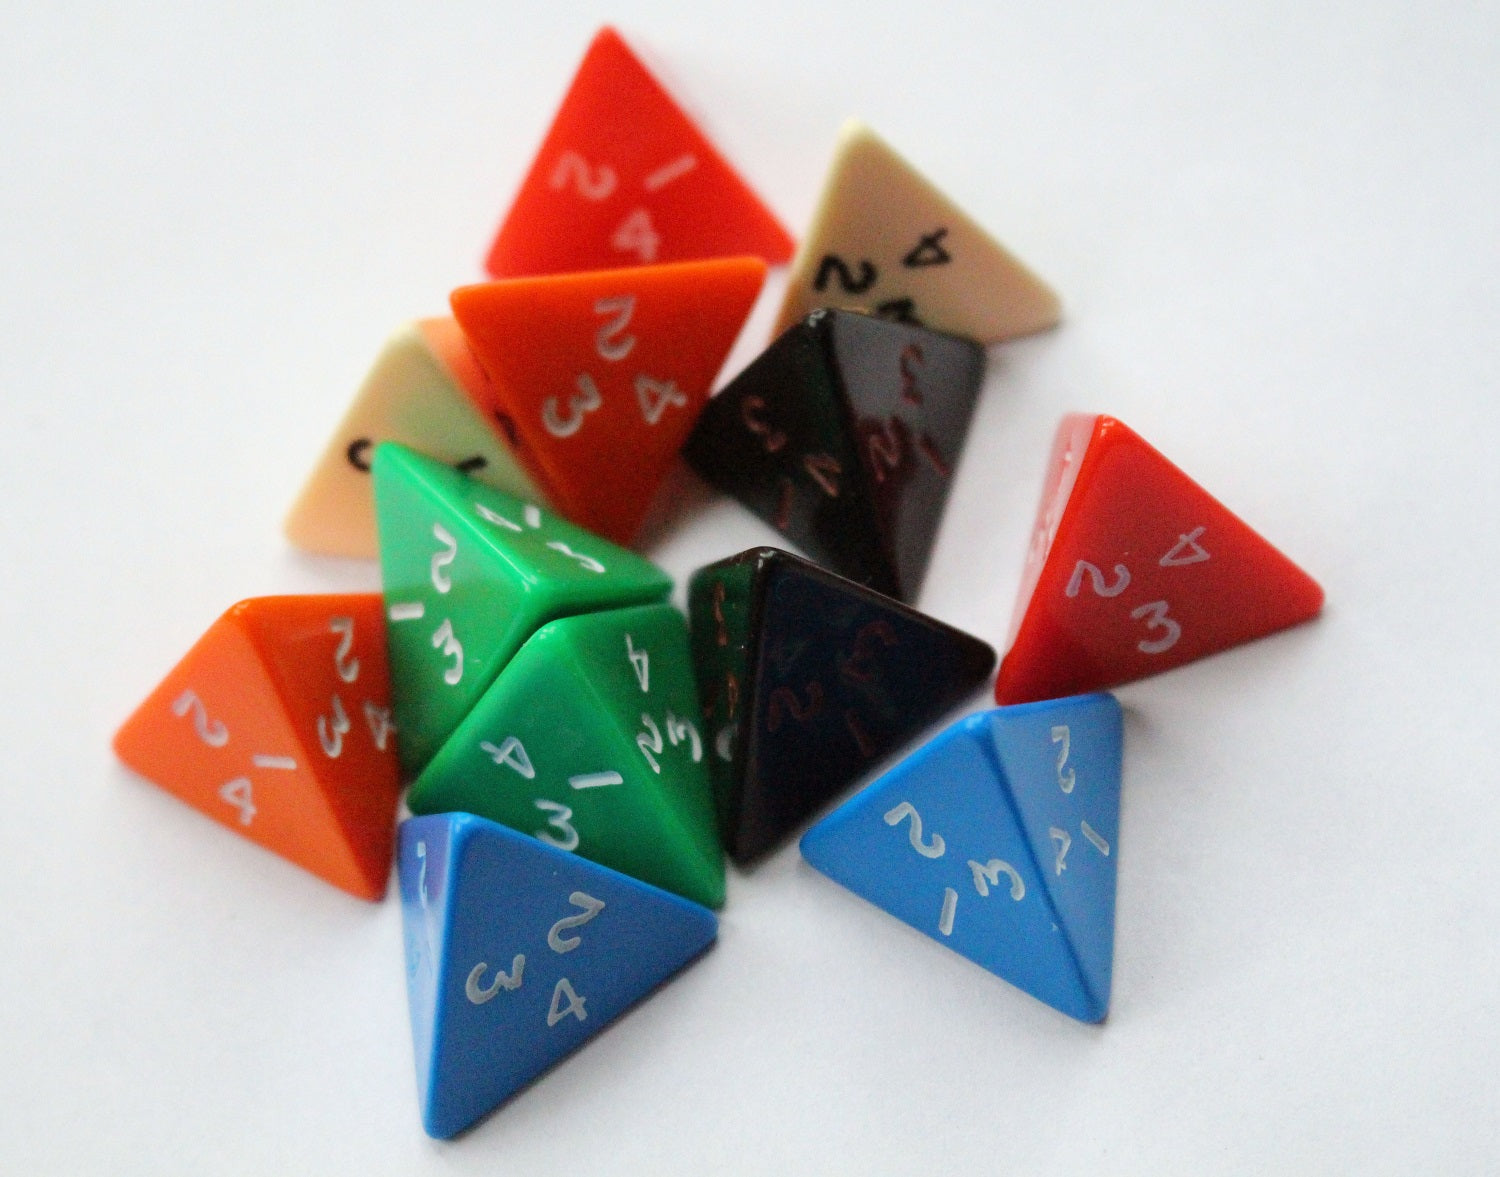 How are these not the dominant form for four sided dice? : r